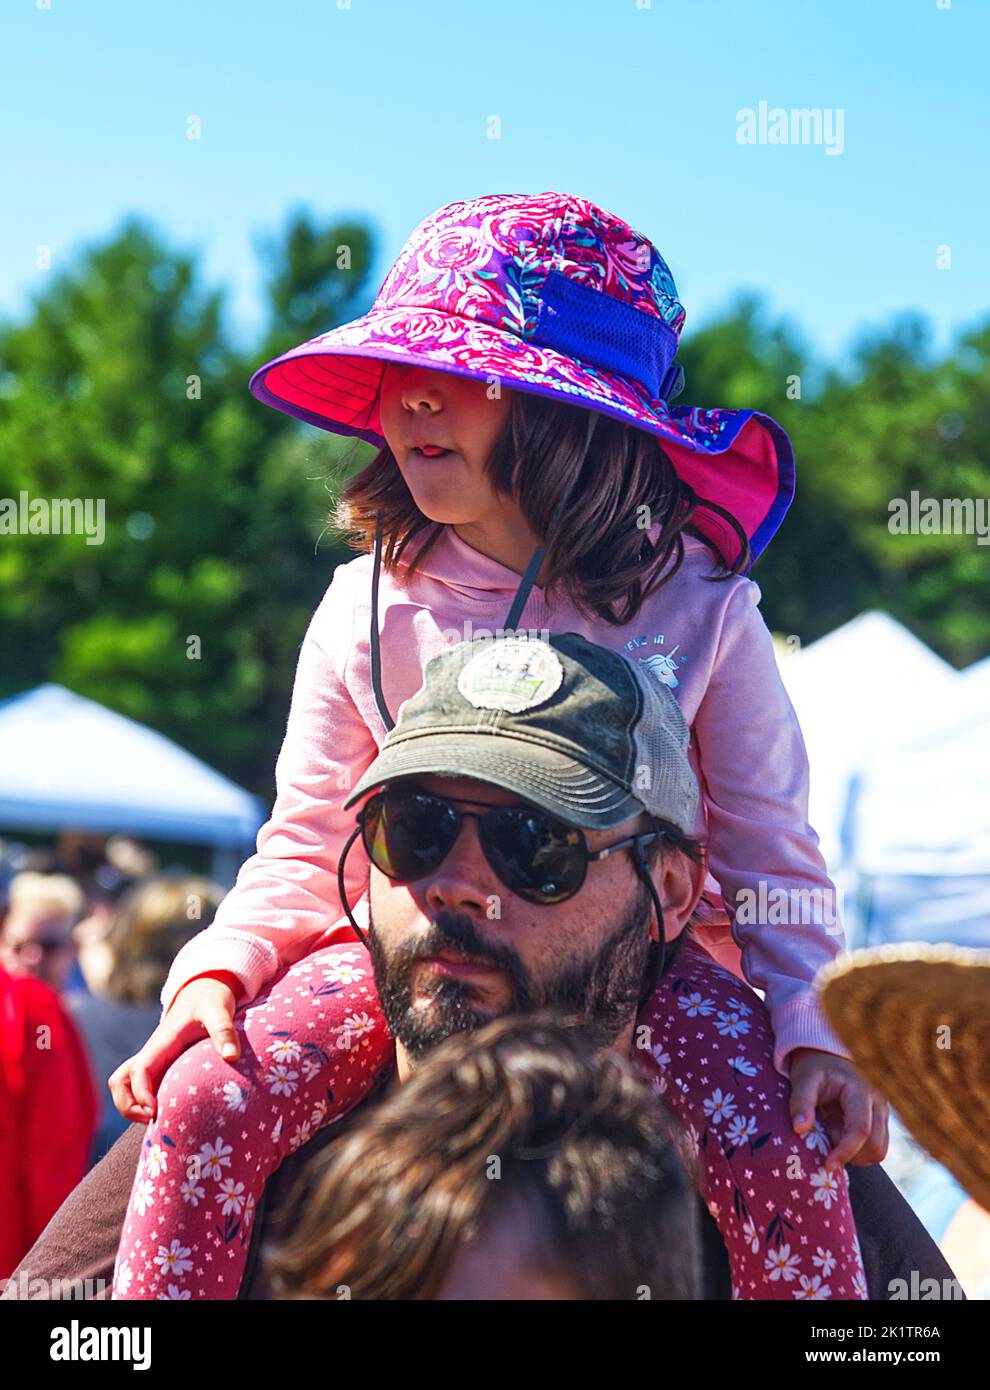 A young girl on her father's shoulders at the annual Cranberry Festival in Harwich, Massachusetts on Cape Cod, USA Stock Photo